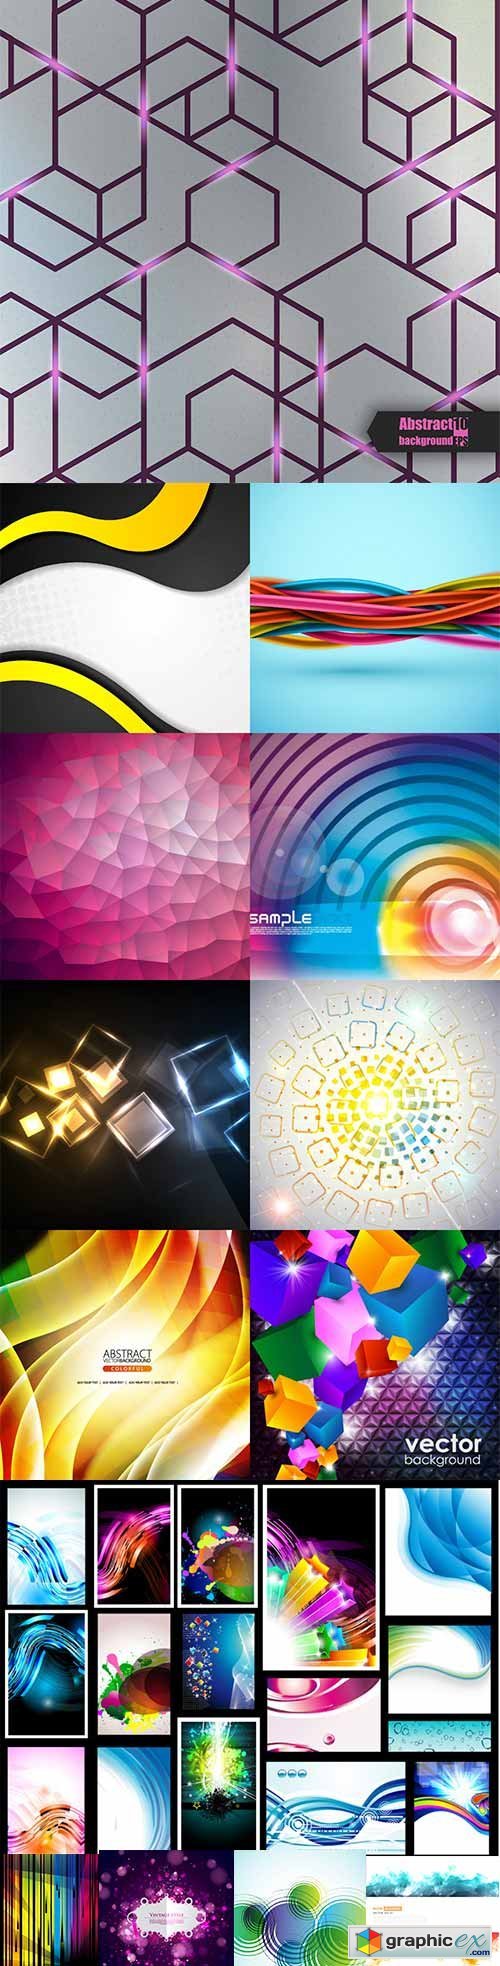 Bright colorful abstract backgrounds vector -45